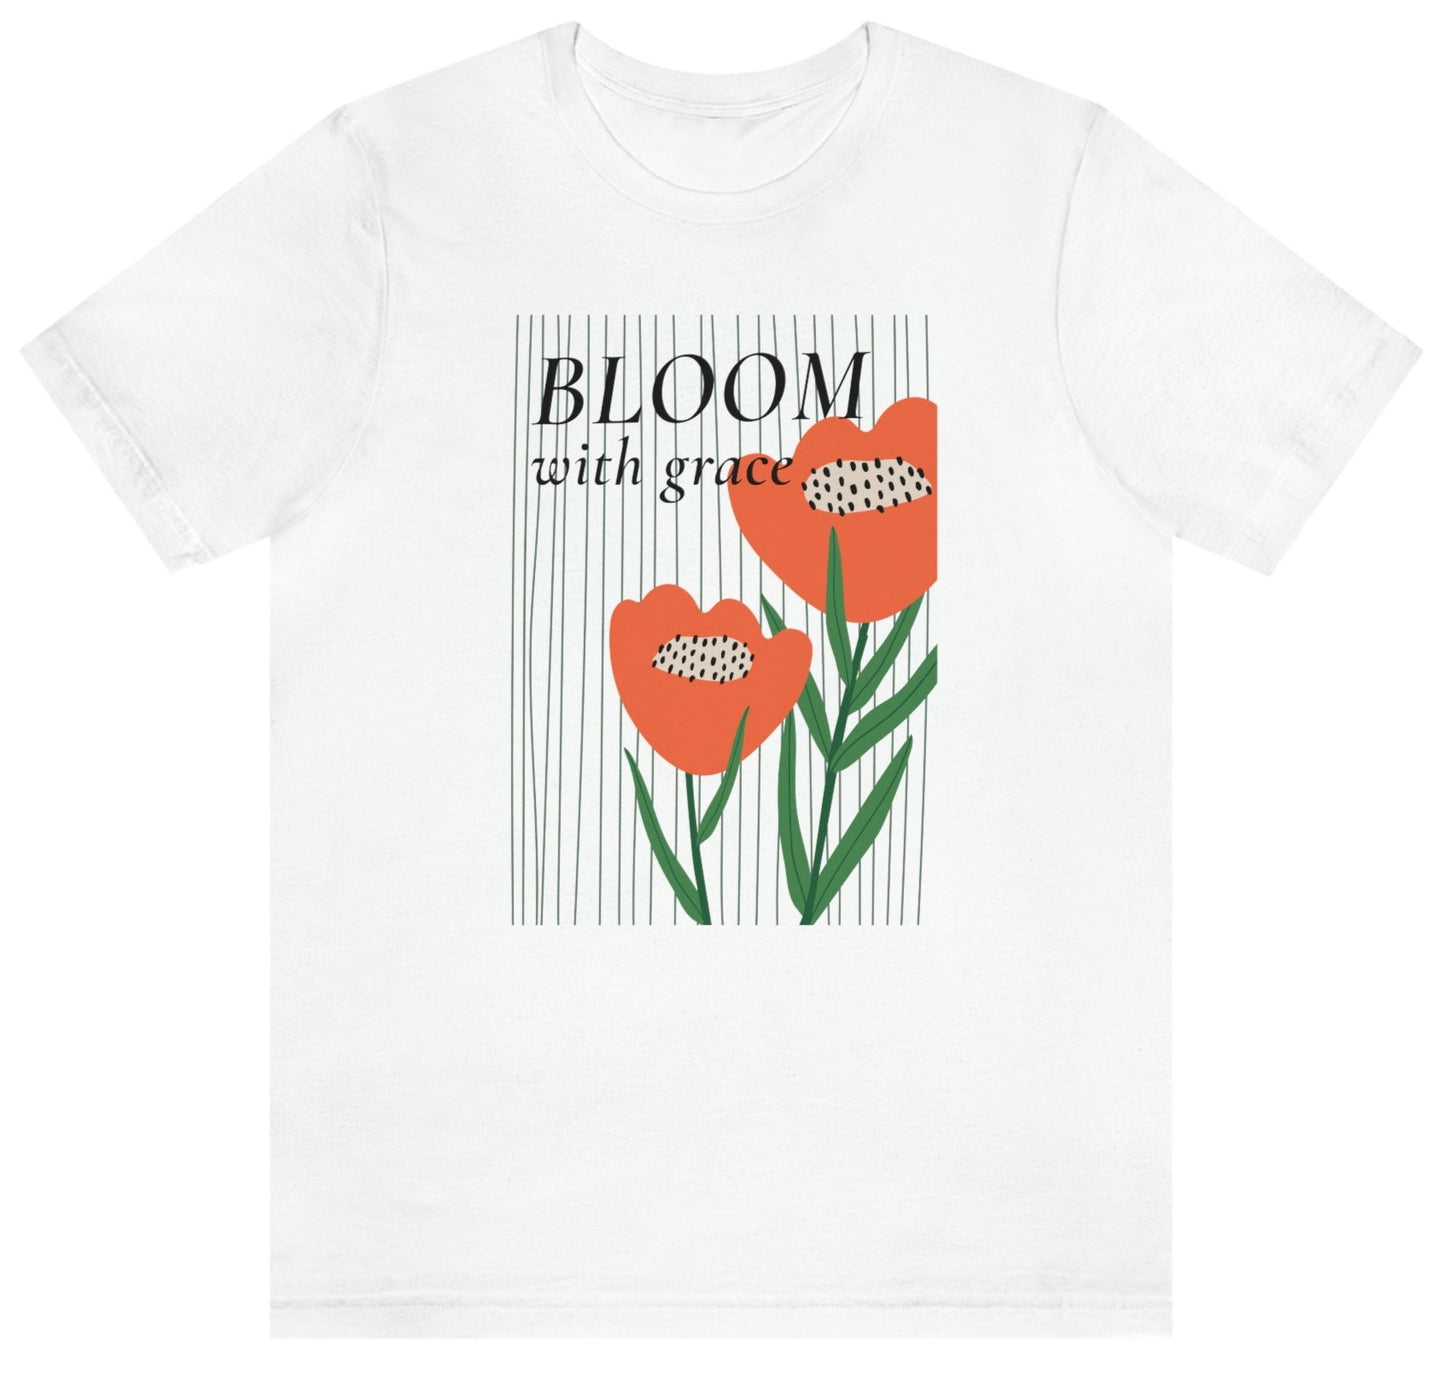 Bloom With Grace - Unisex T-Shirt